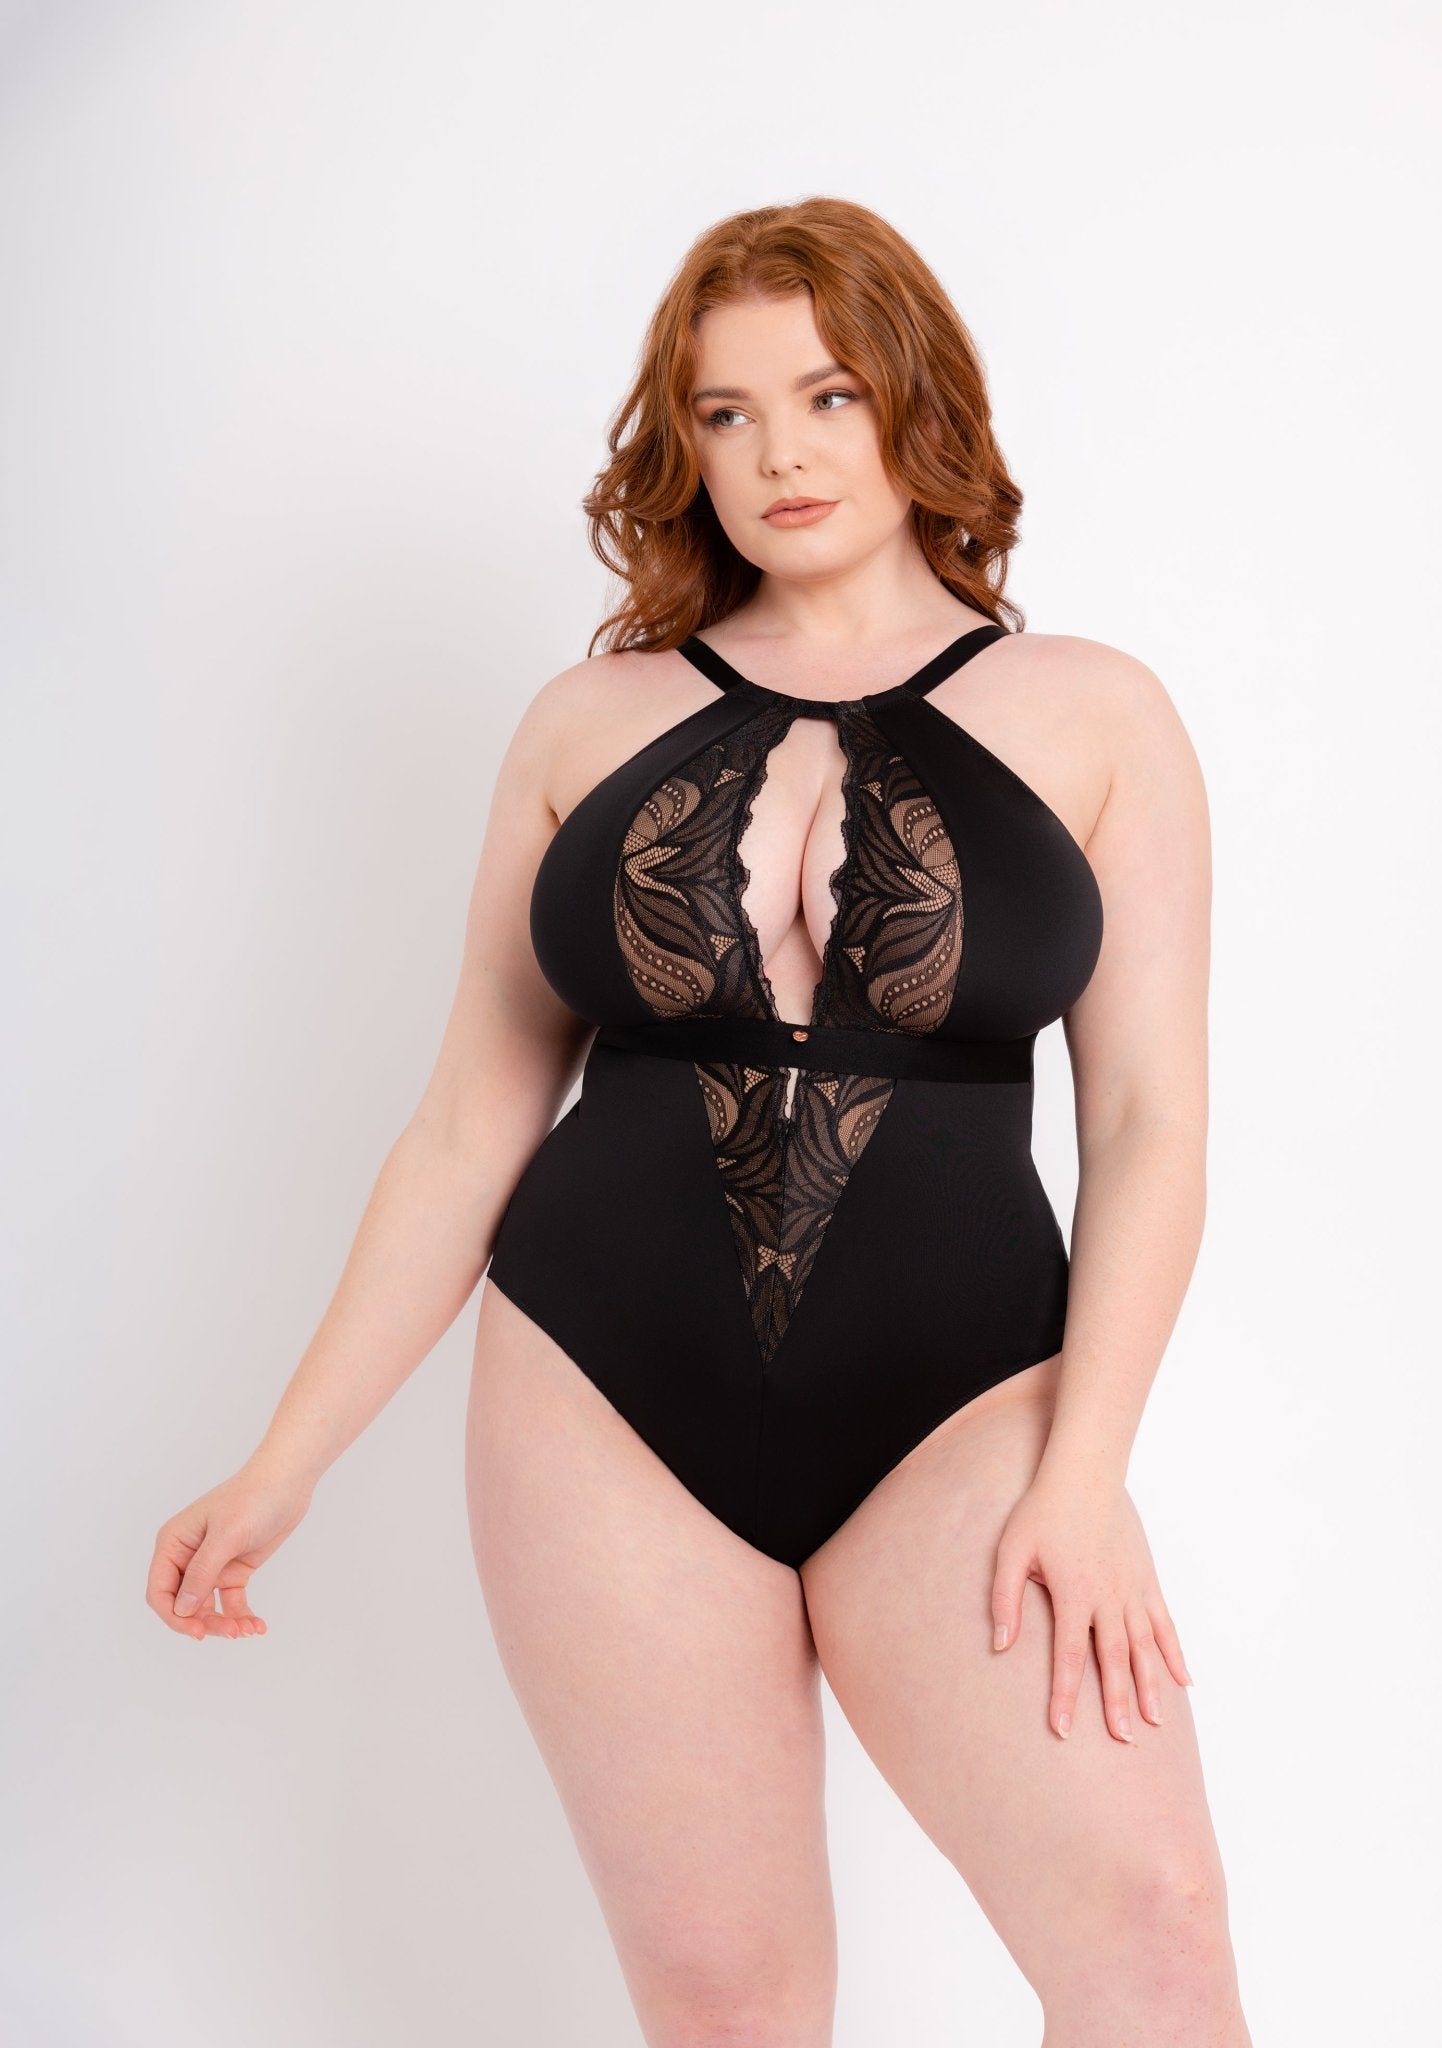 Scantilly - Indulgence stretch lace body in black/latte